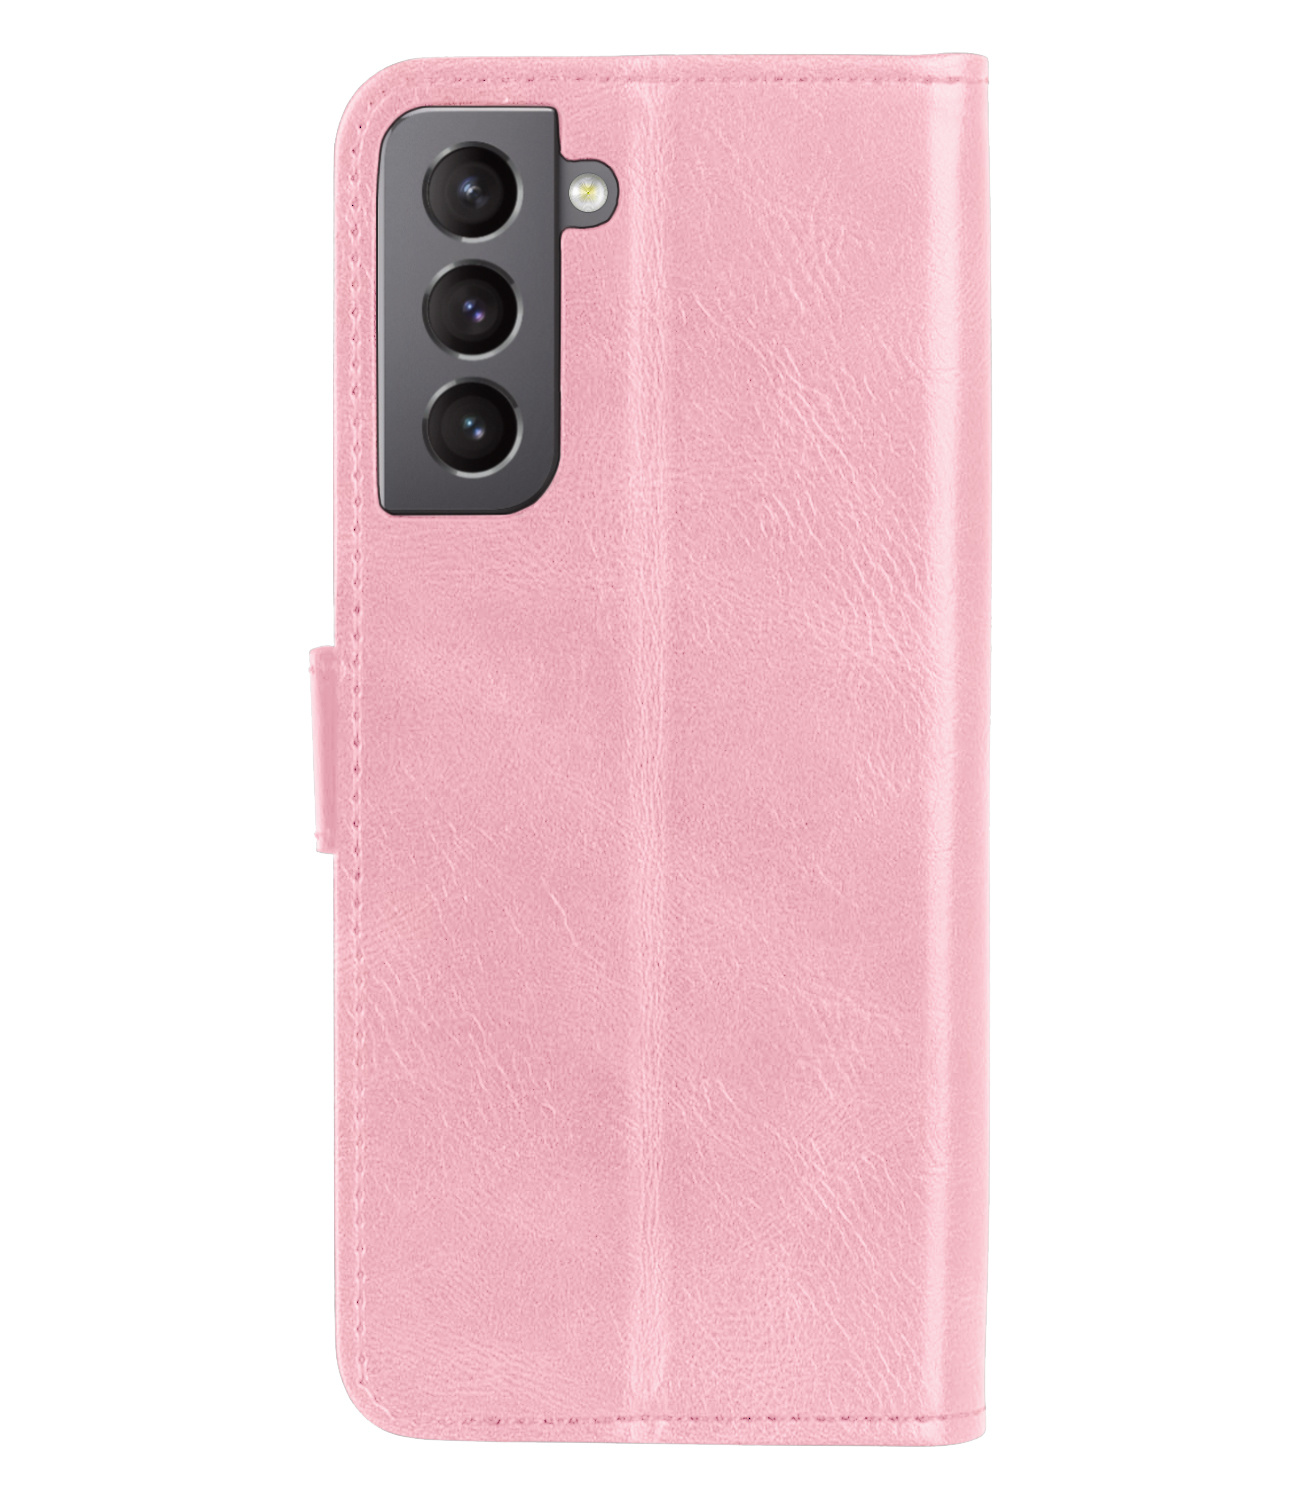 Nomfy Samsung Galaxy S21 FE Hoes Bookcase Licht Roze - Samsung Galaxy S21 FE Book Cover Flipcase - Samsung Galaxy S21 FE Hoesje - Lichtroze